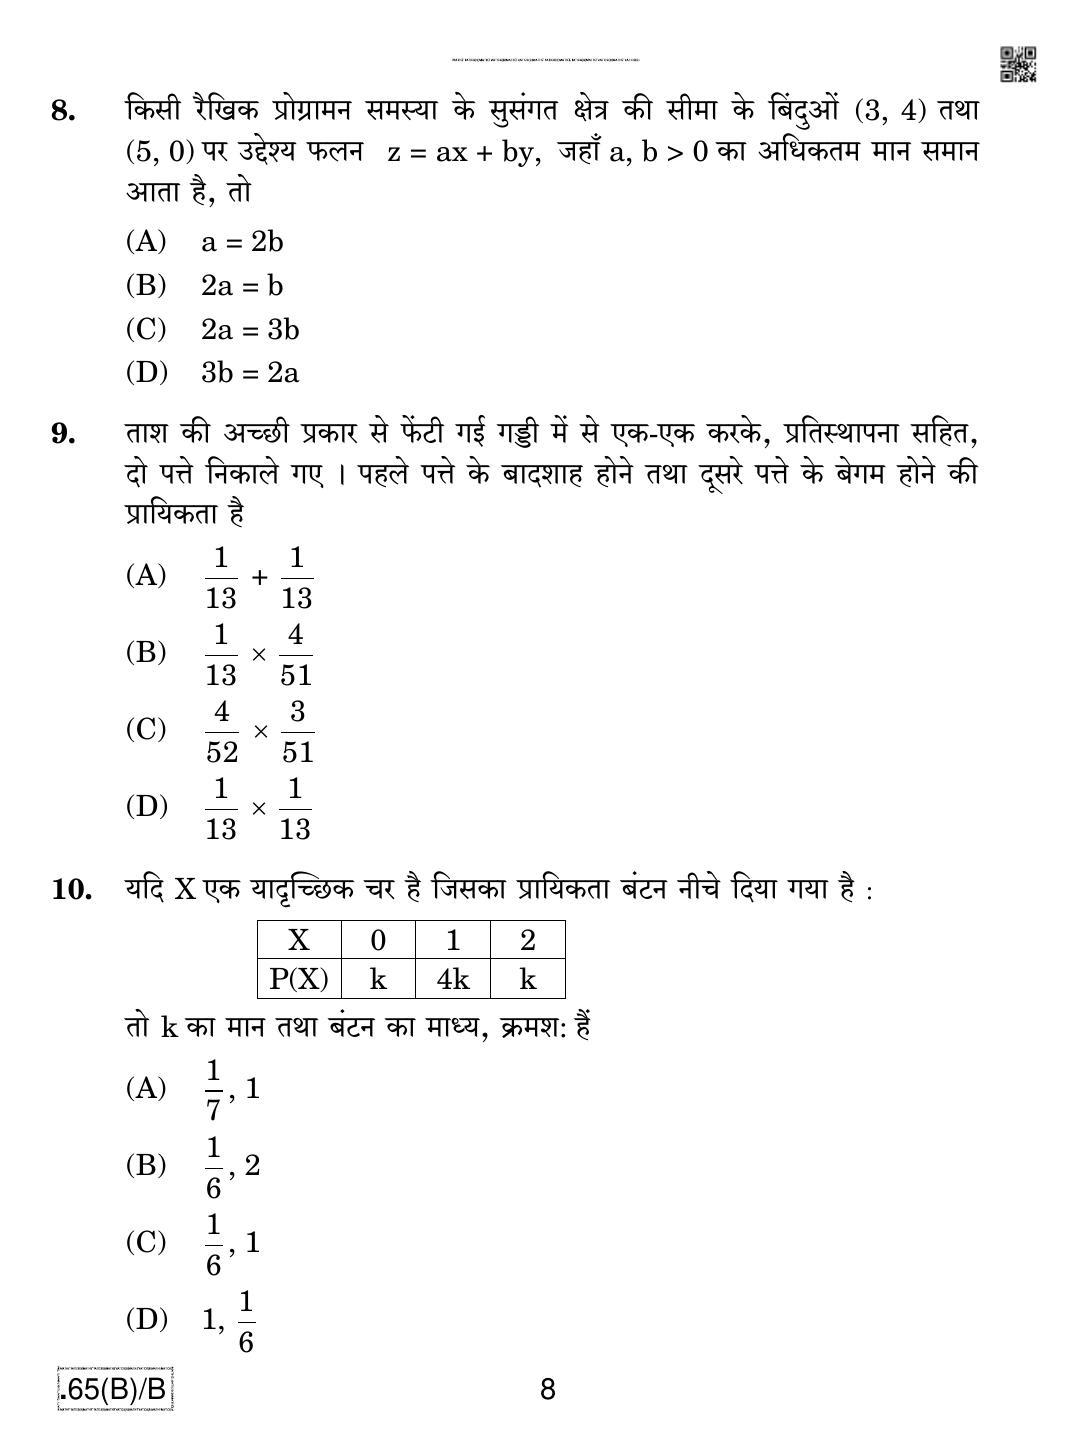 CBSE Class 12 65(B)-C - Maths For Blind Candidates 2020 Compartment Question Paper - Page 8